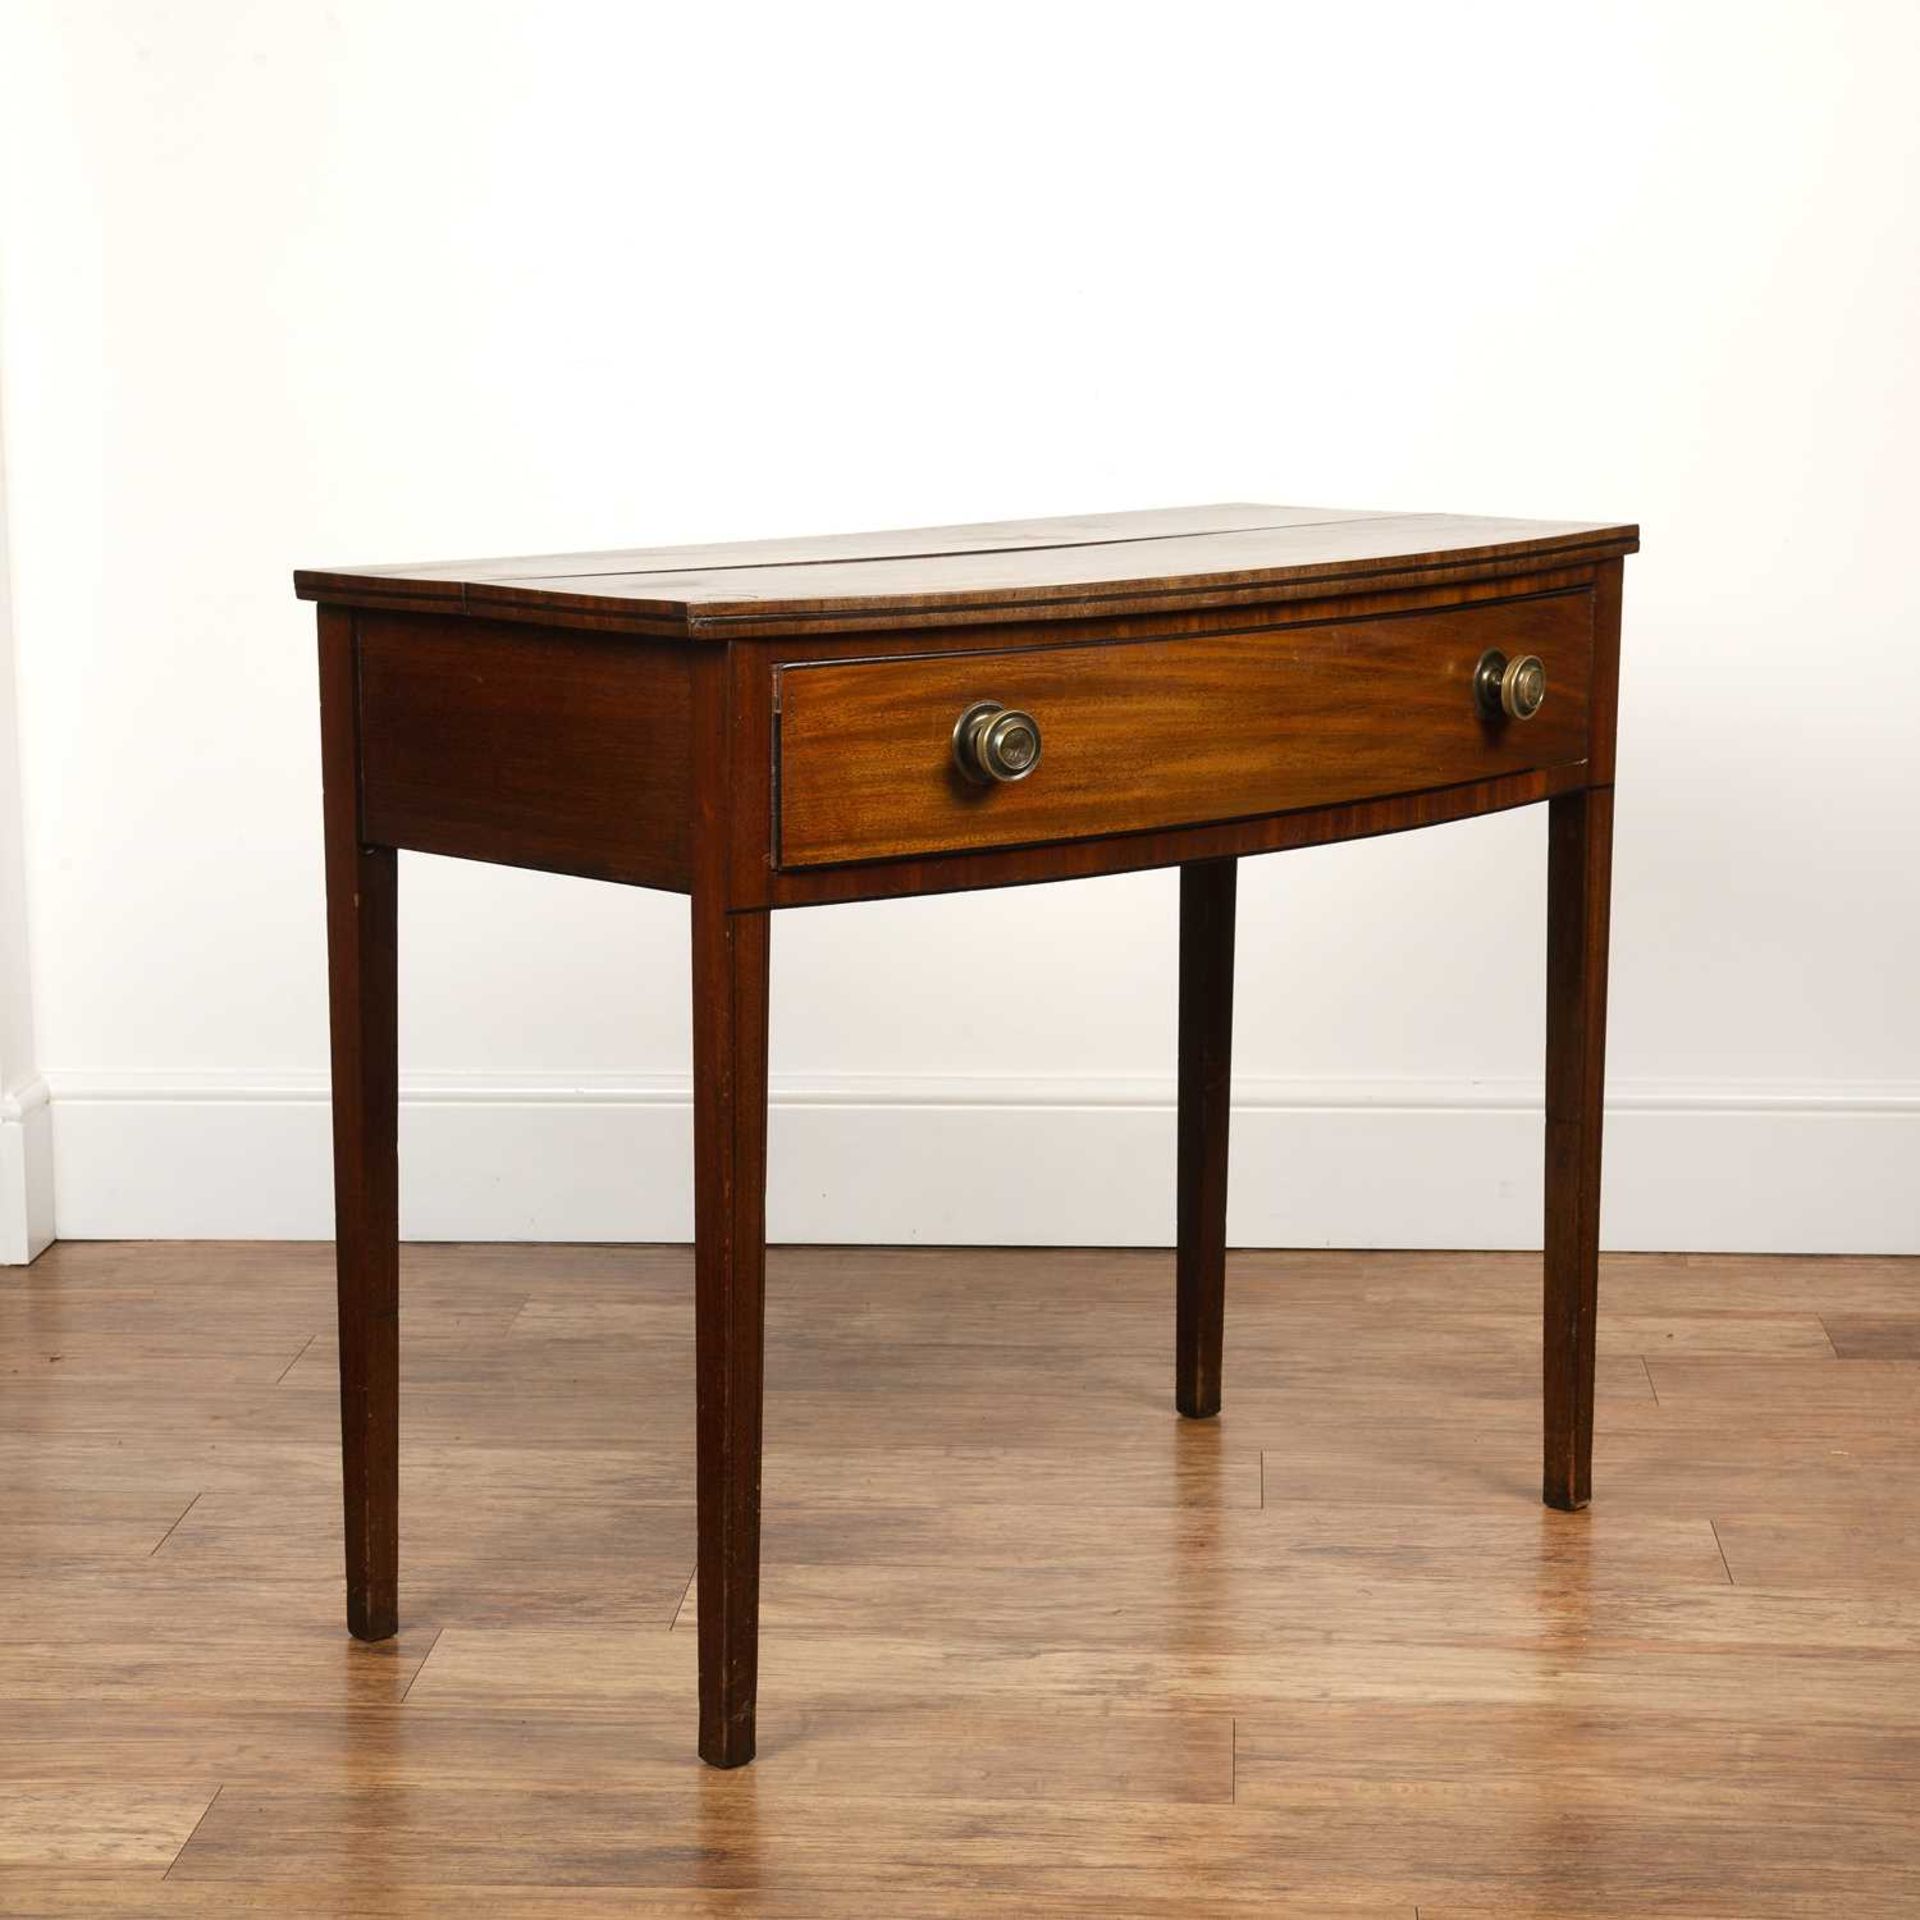 Mahogany bow fronted side table with single frieze drawer and brass handles, standing on square - Image 2 of 5